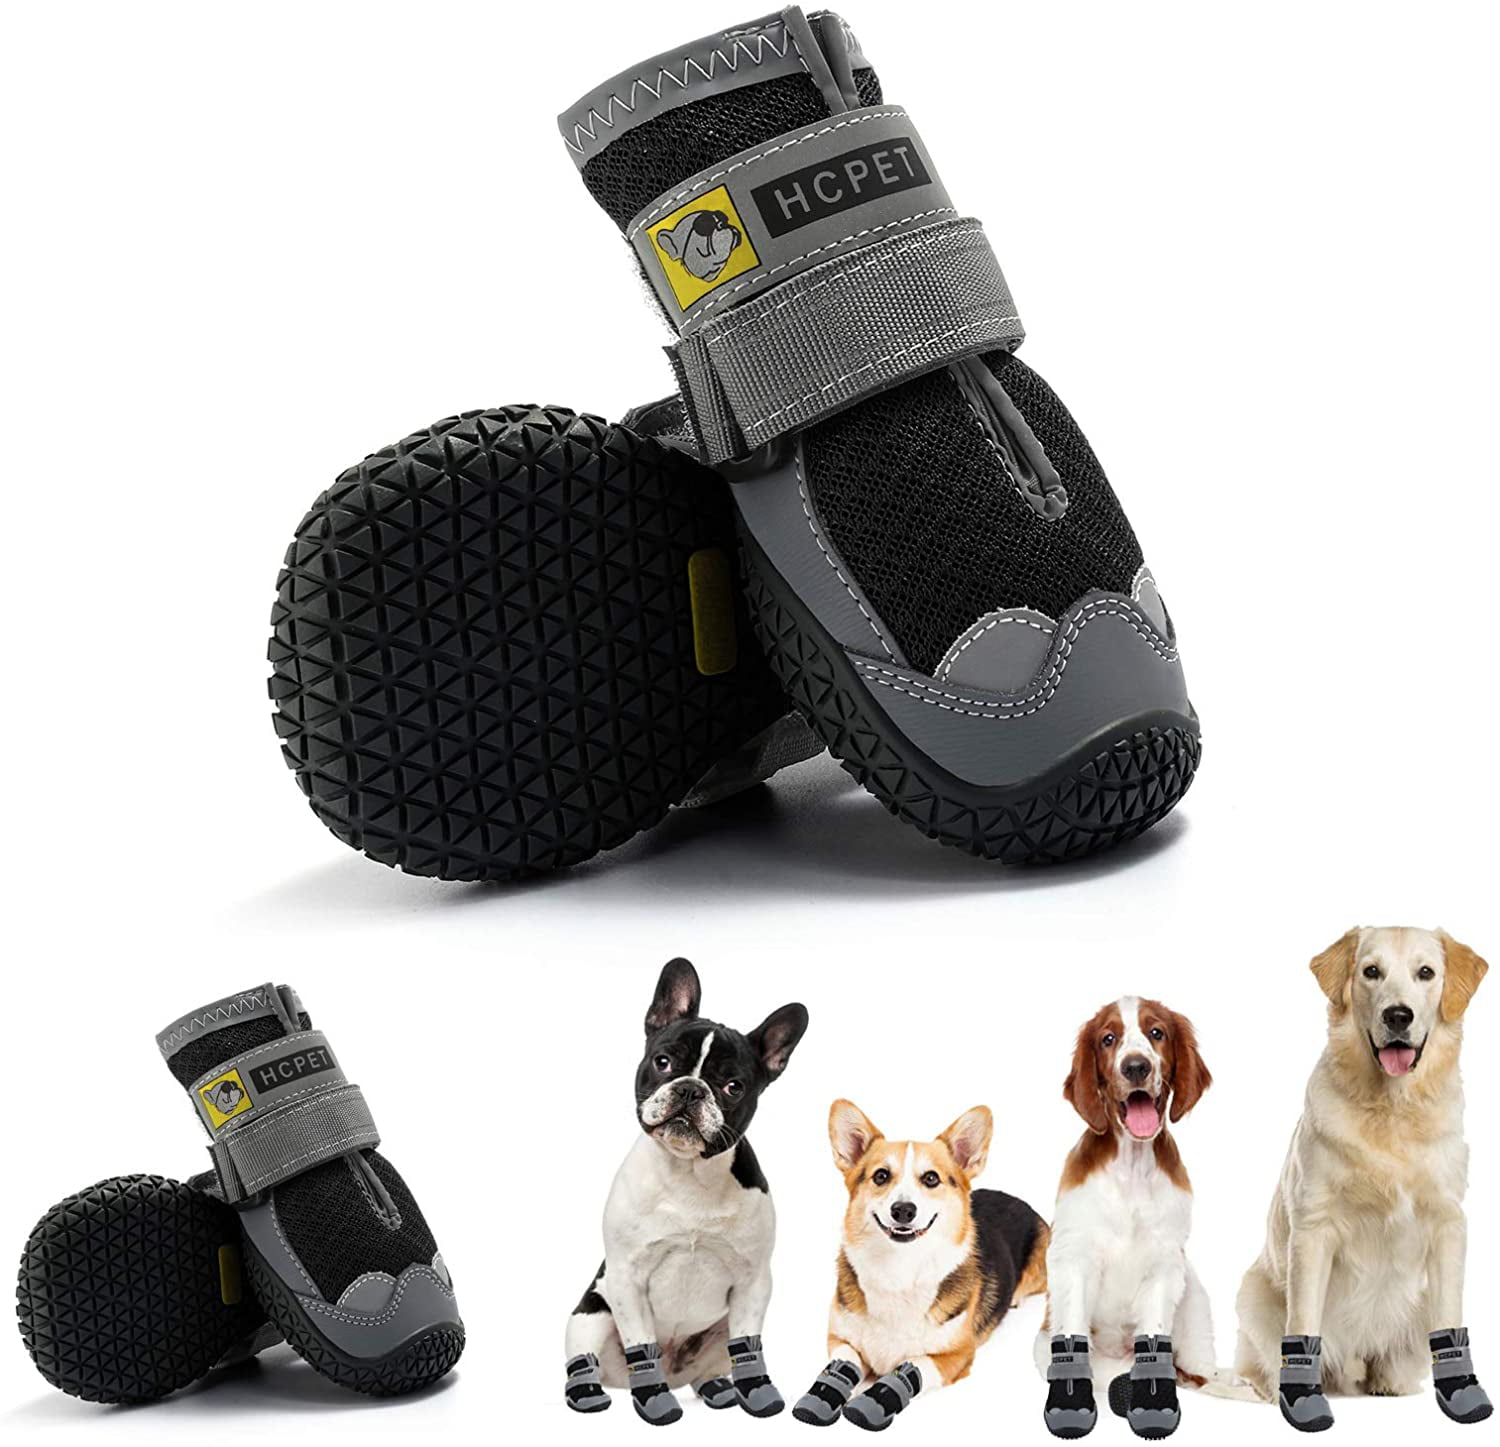 4 Pcs Fashionable Waterproof Non-Slip Breathable Dog Shoes Soft Comfortable Pet Boots Puppies Outdoor Shoes with Reflective Straps for Walking Hiking Camping 4# Black Pet Shoes